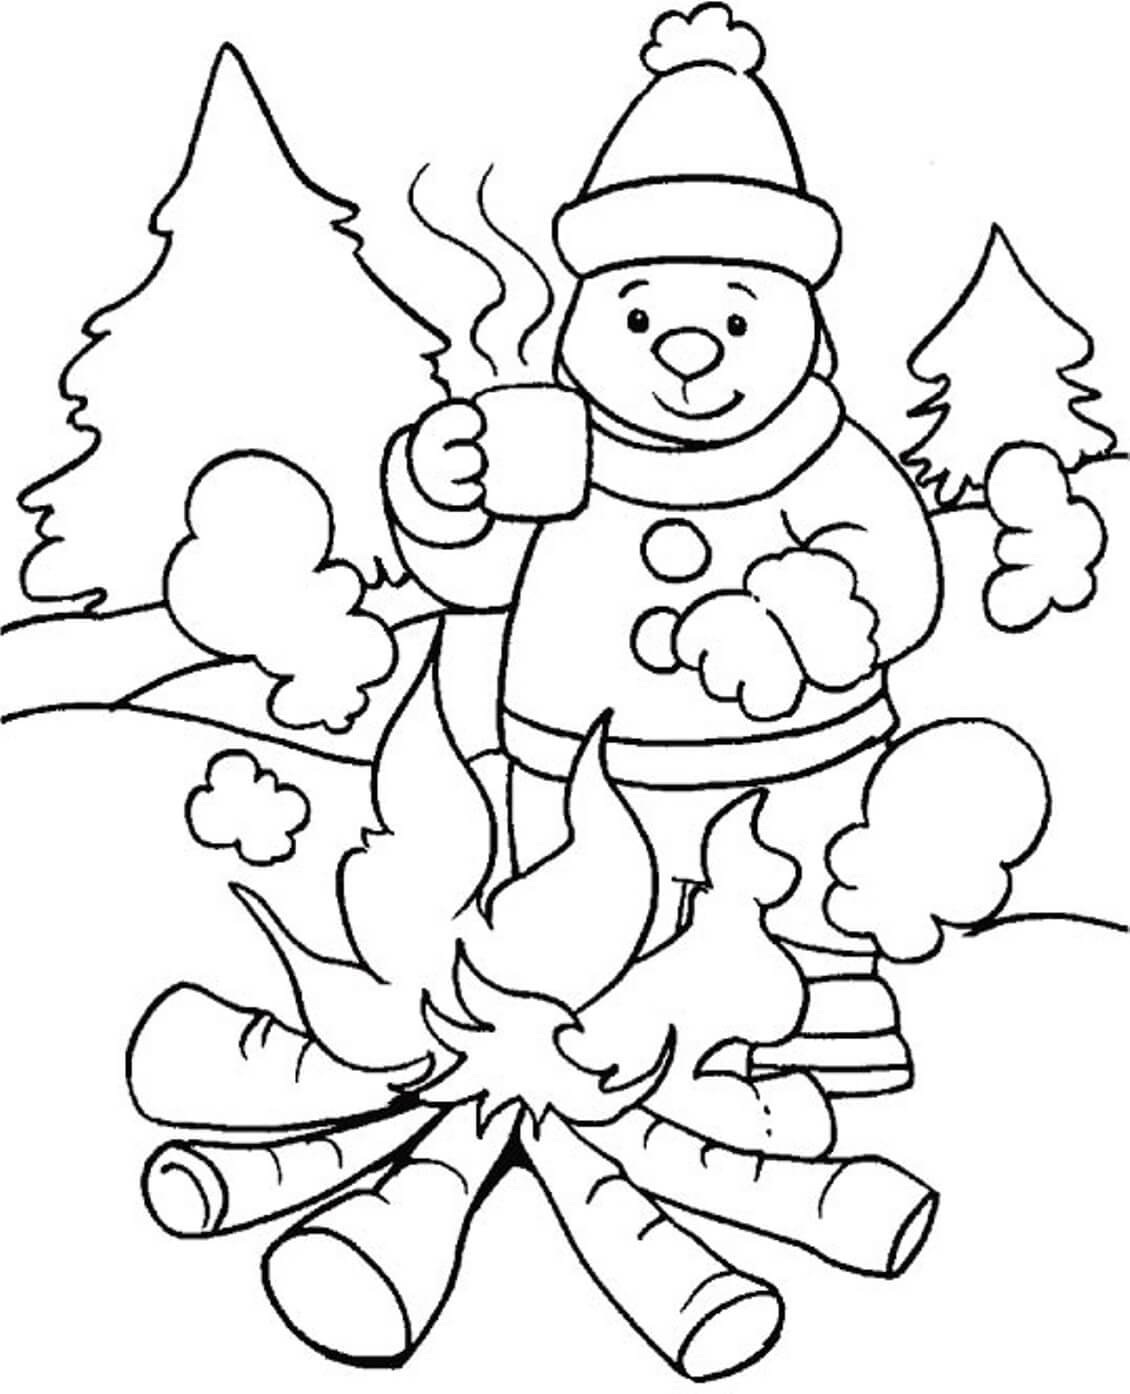 Winter Coloring Pages Printable free